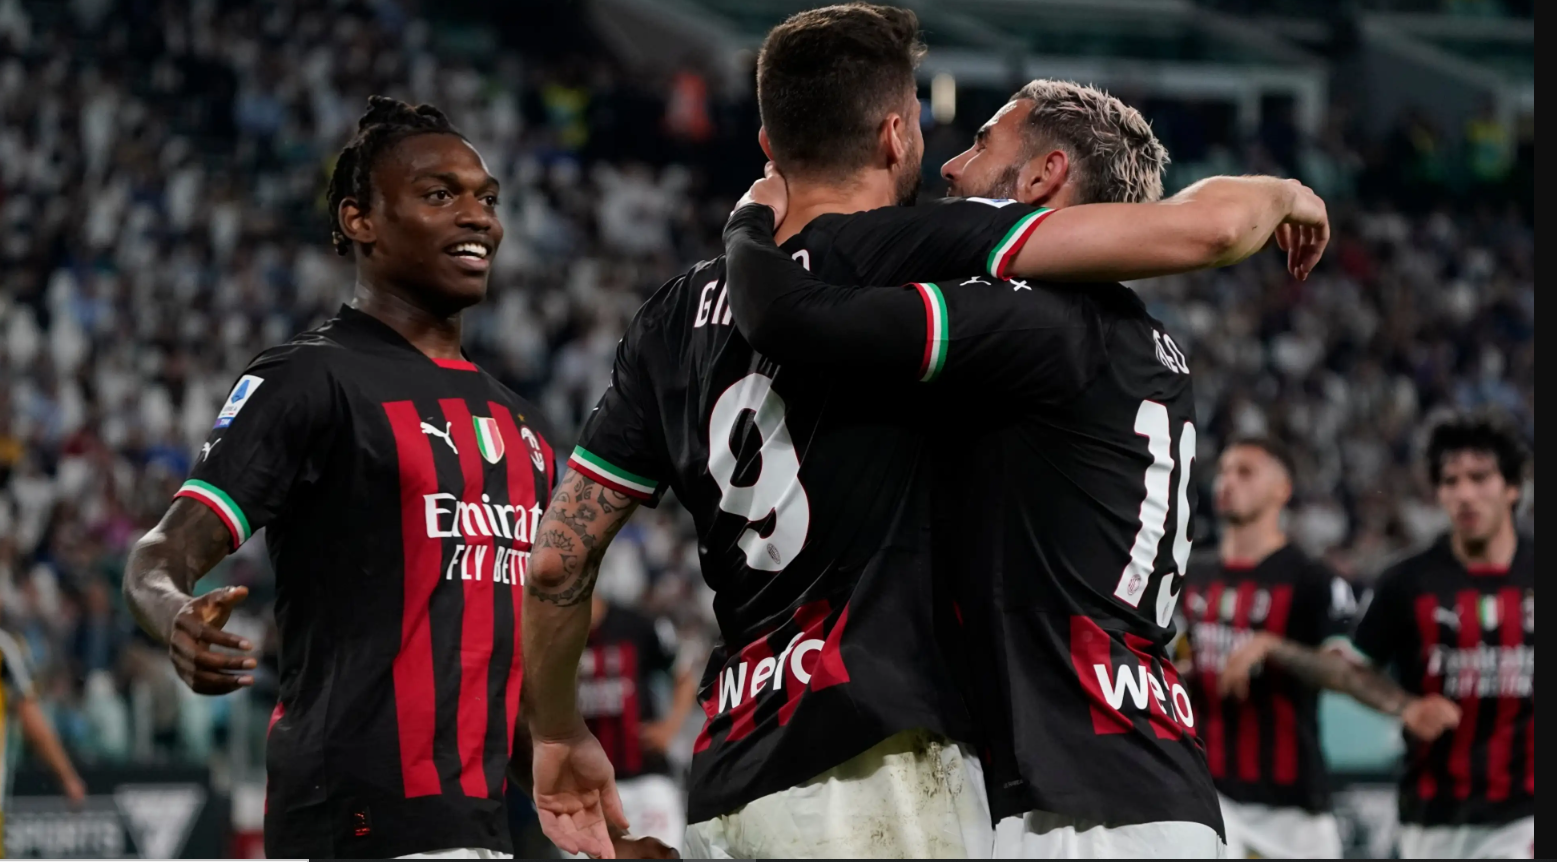 Olivier Giroud's only goal of the night at the Allianz Stadium helped Milan edge past Juventus in the second-to-last Serie A round